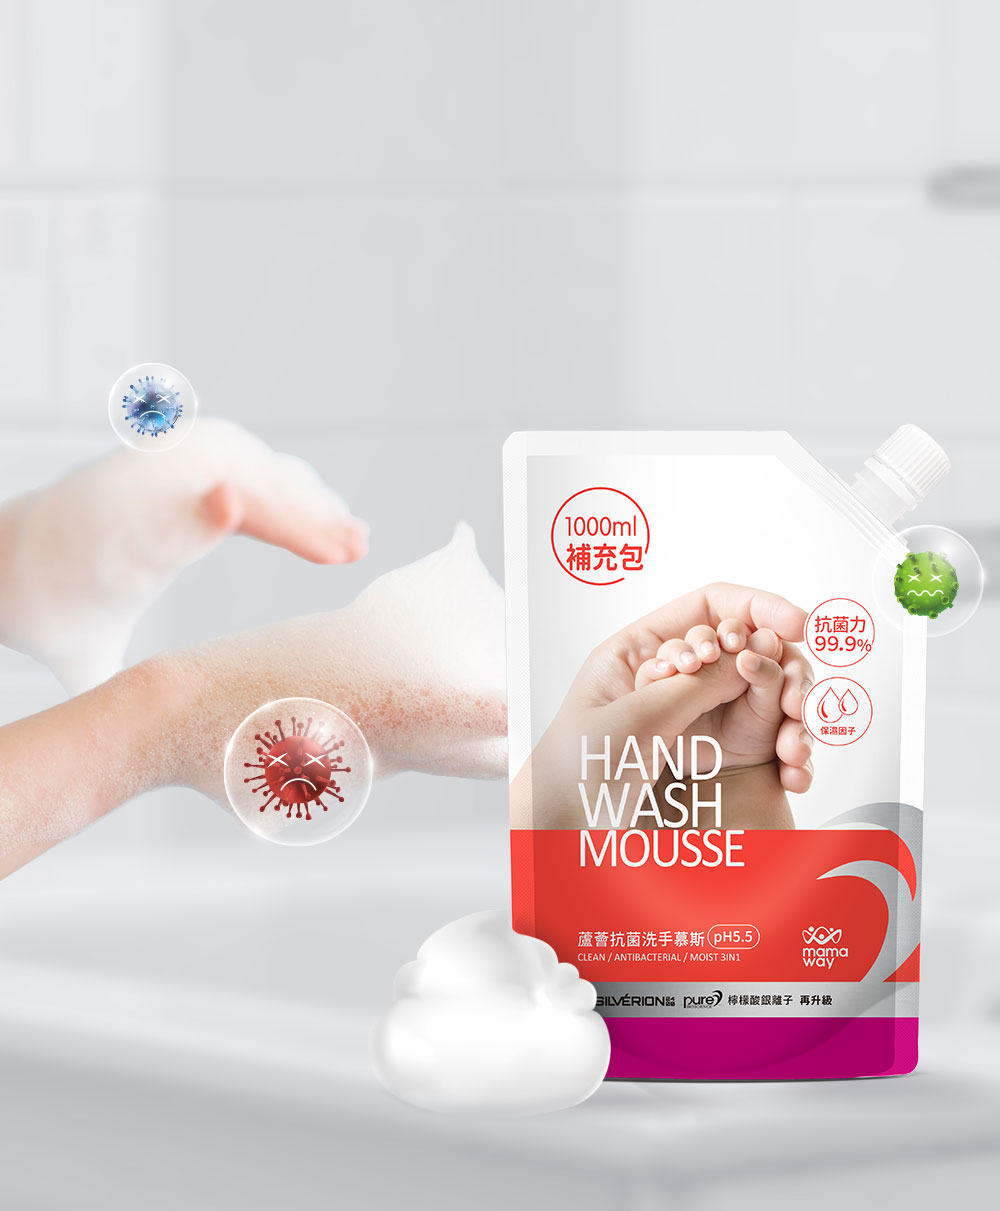 Hand wash mousse- refill